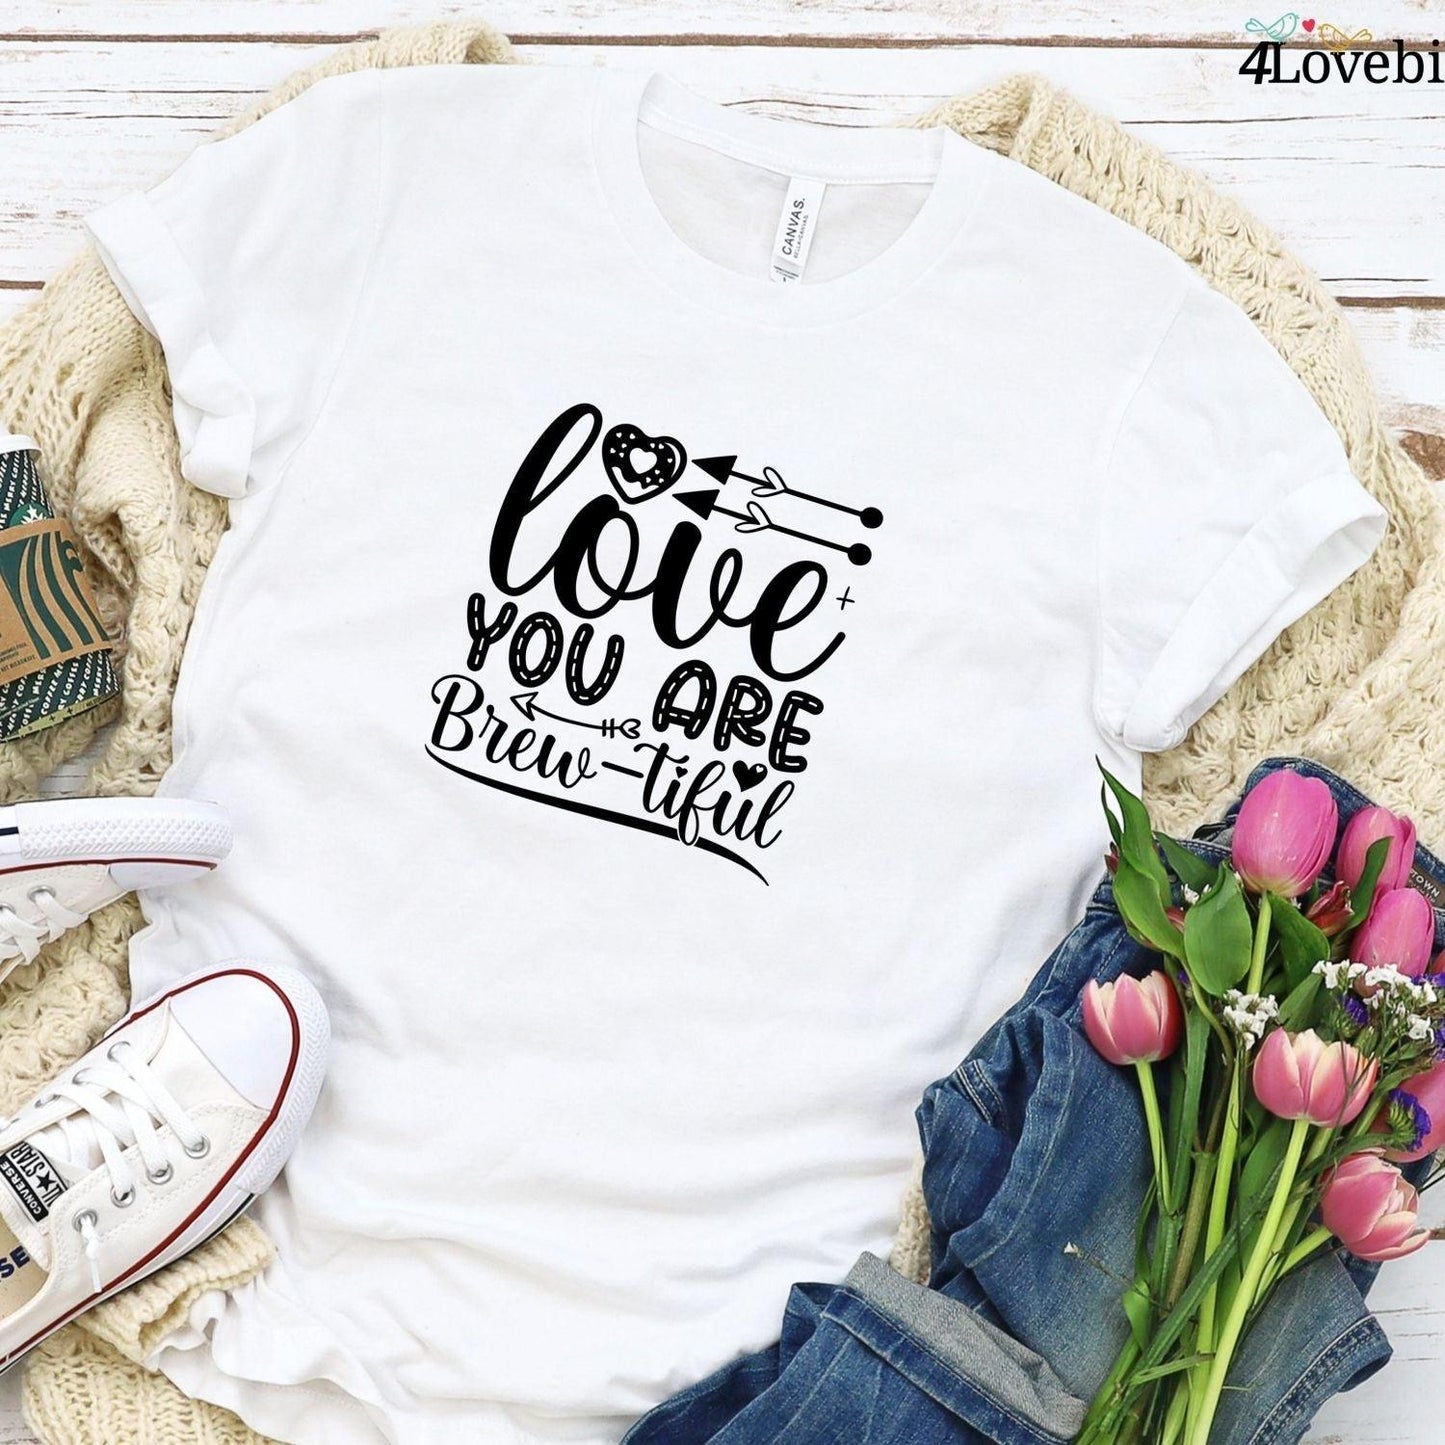 Matching Set: Love You Are Brew-tiful - Perfect Couple Gift for Valentine's Day! - 4Lovebirds